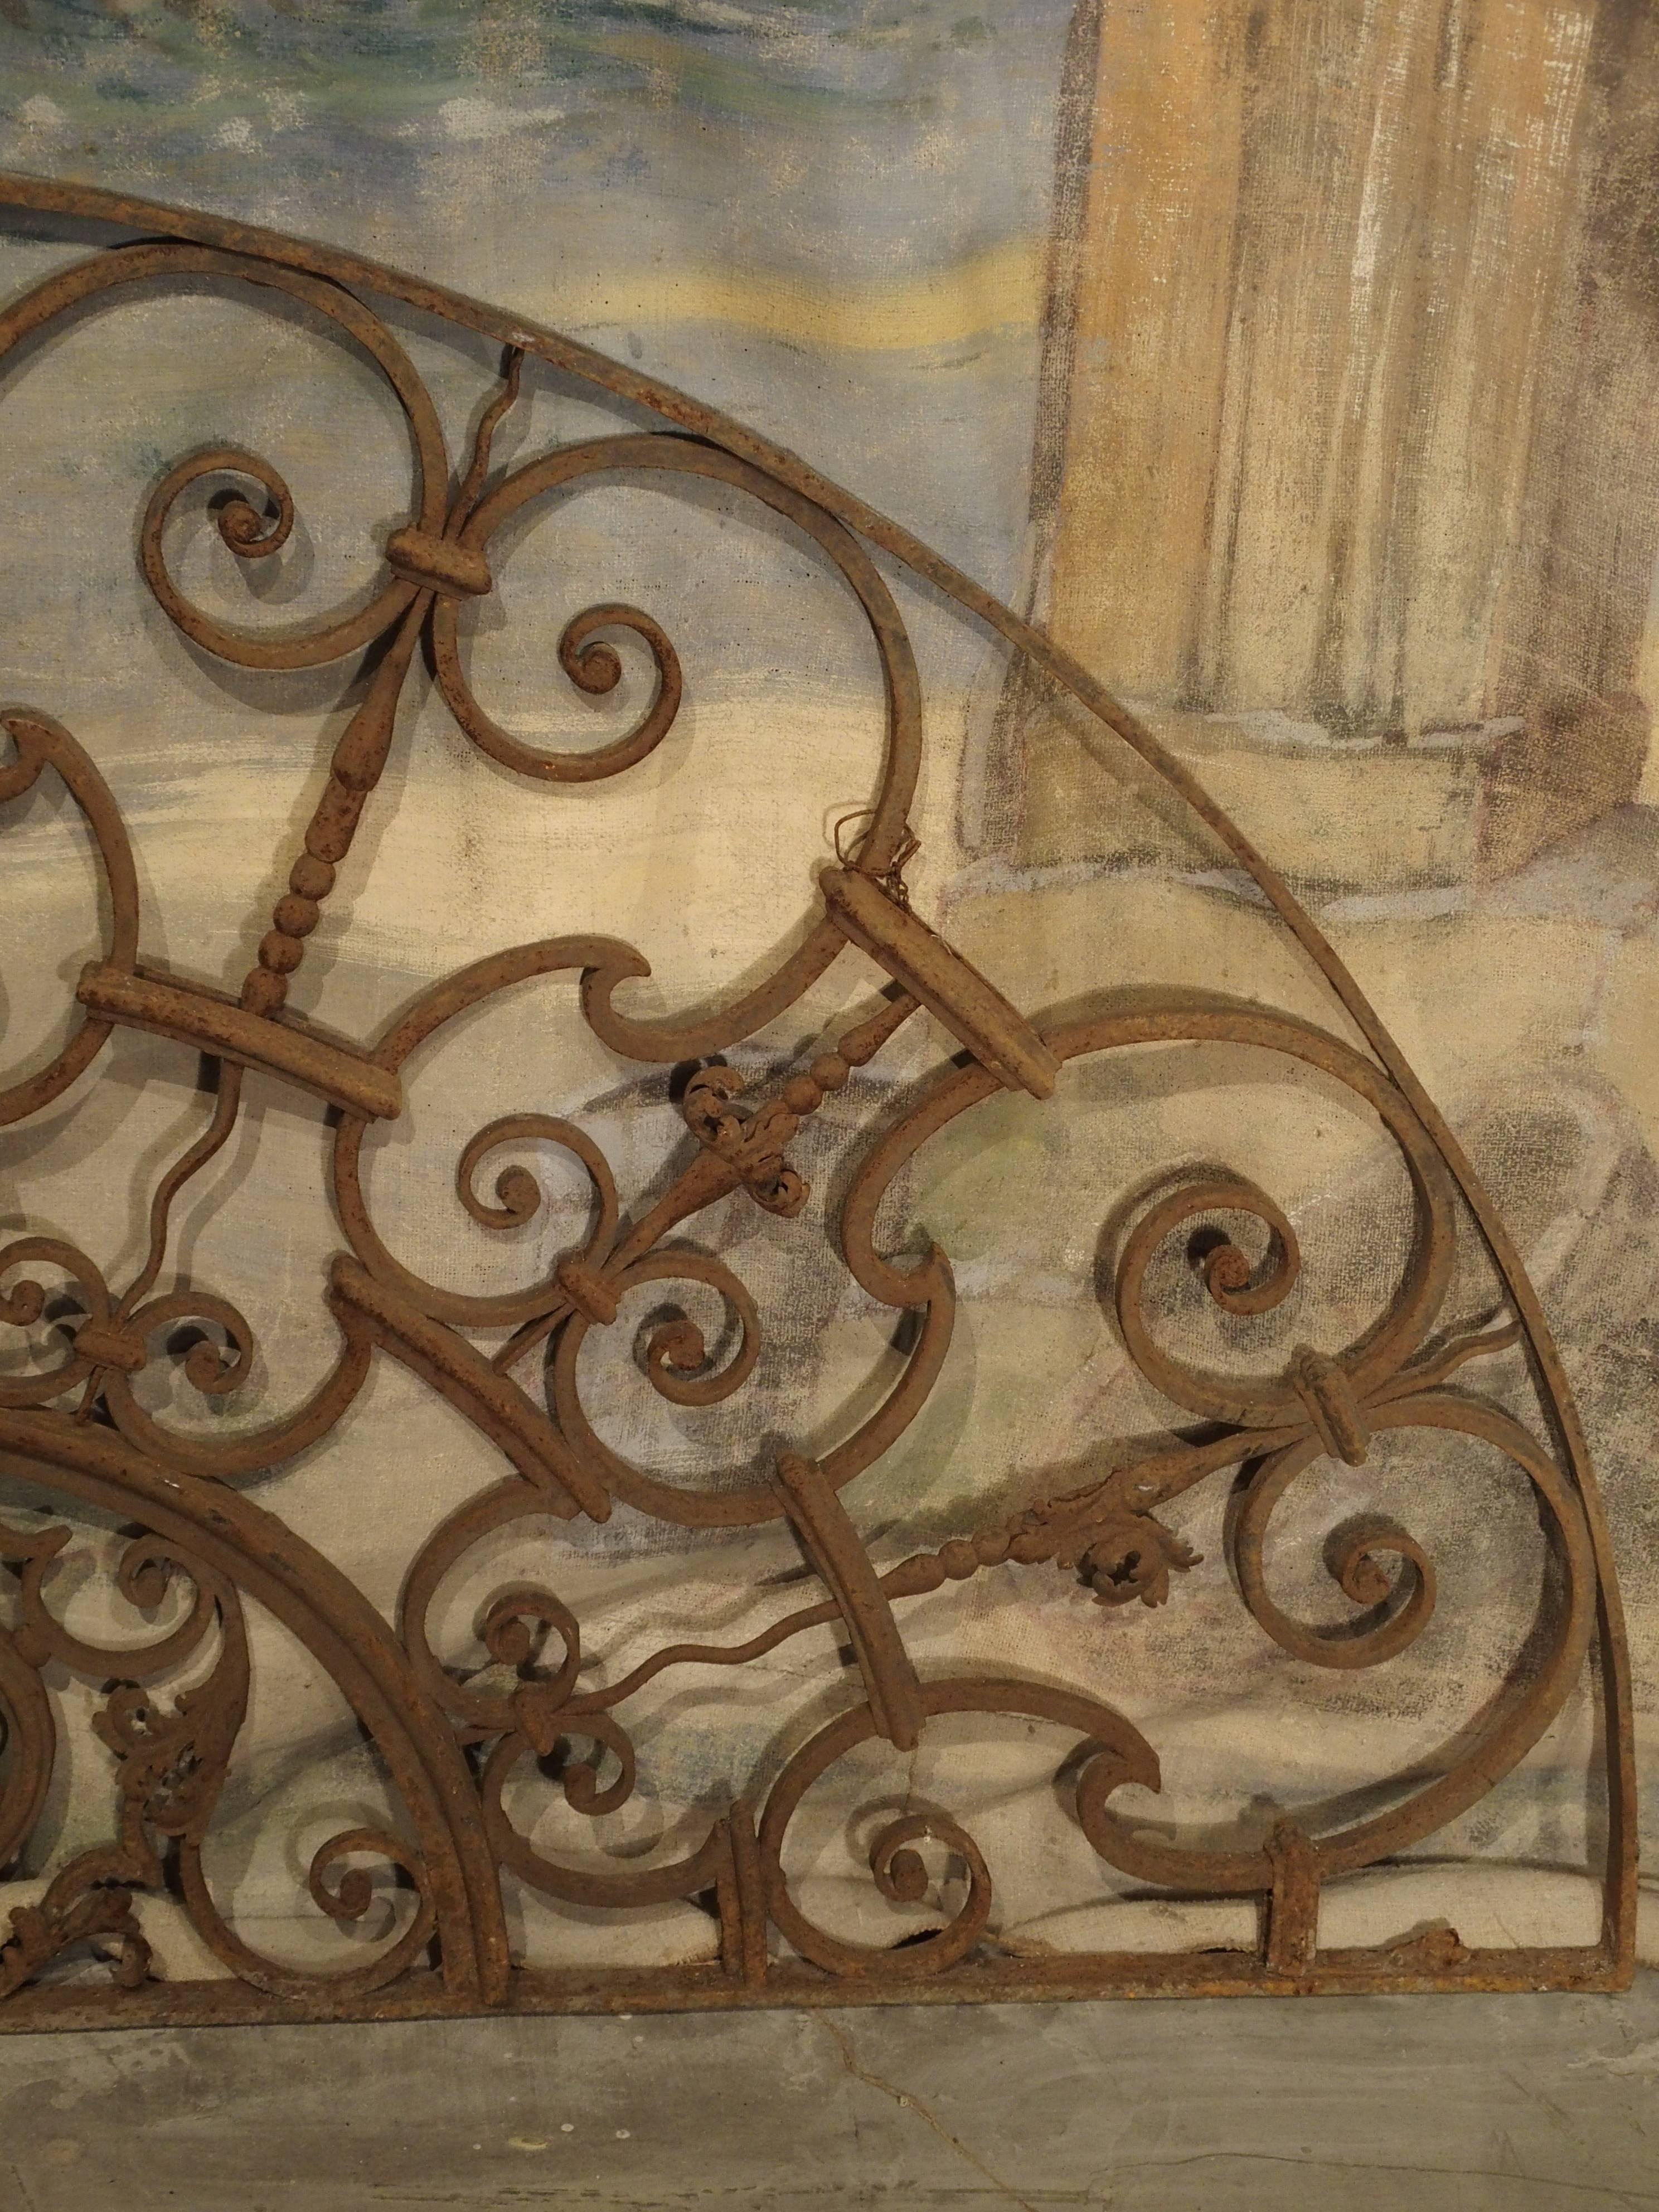 From Provence, this graceful, scrolling iron, transom/overdoor gate is in the shape of a demilune. At the bottom is another demilune with a cartouche featuring more C-scrolls and a triangle outline. These gates were originally used in different